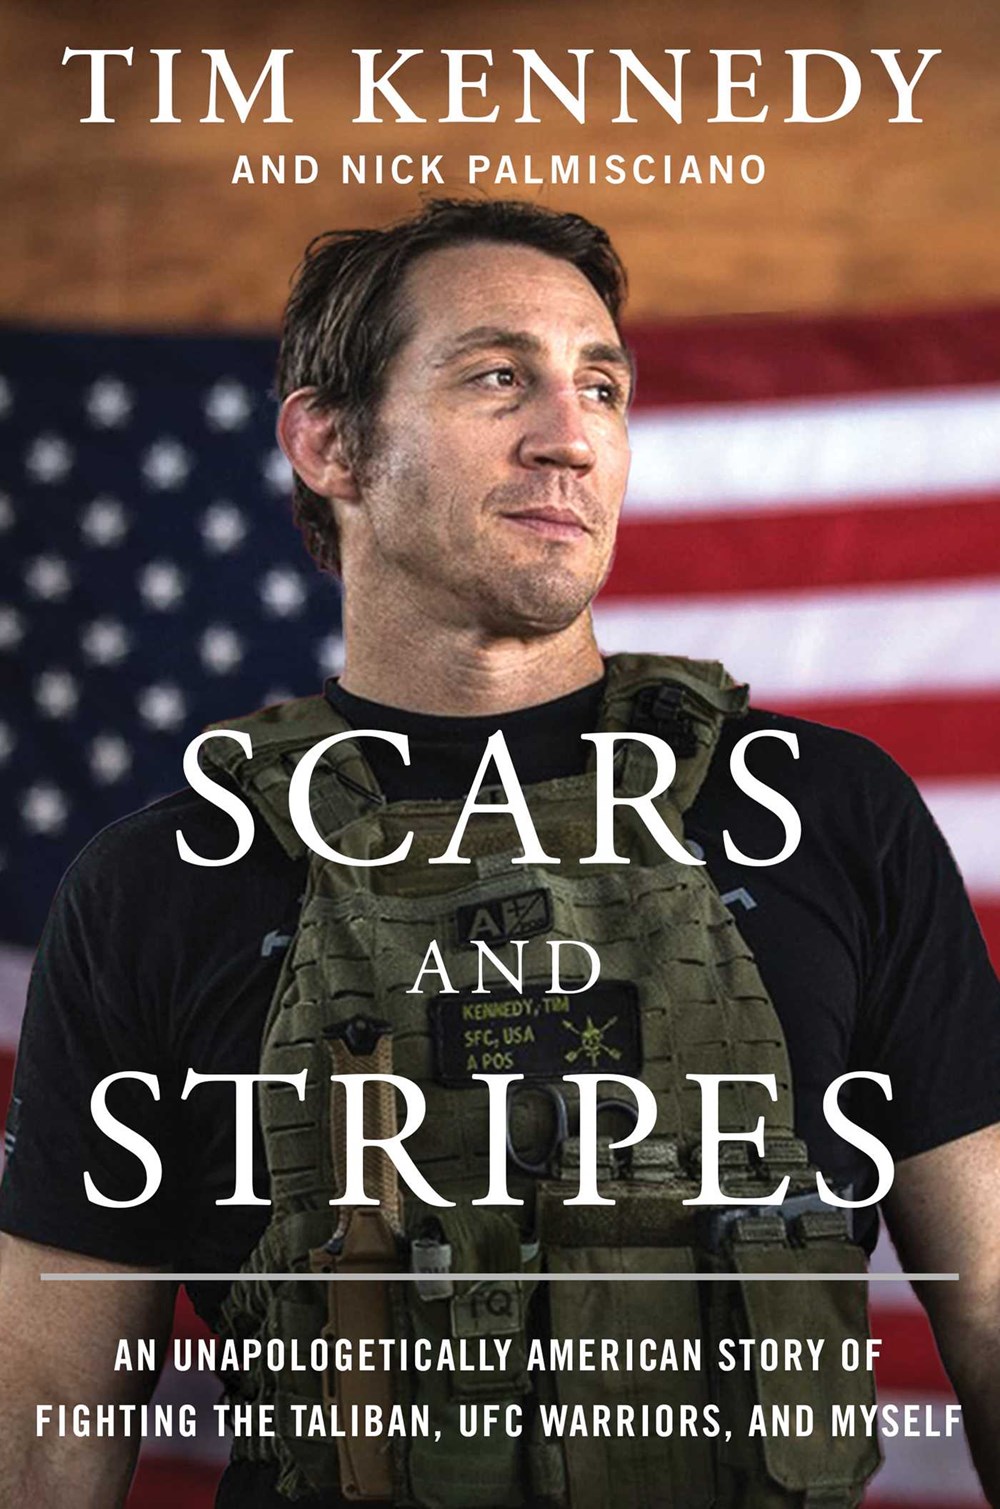 Image for "Scars and Stripes"